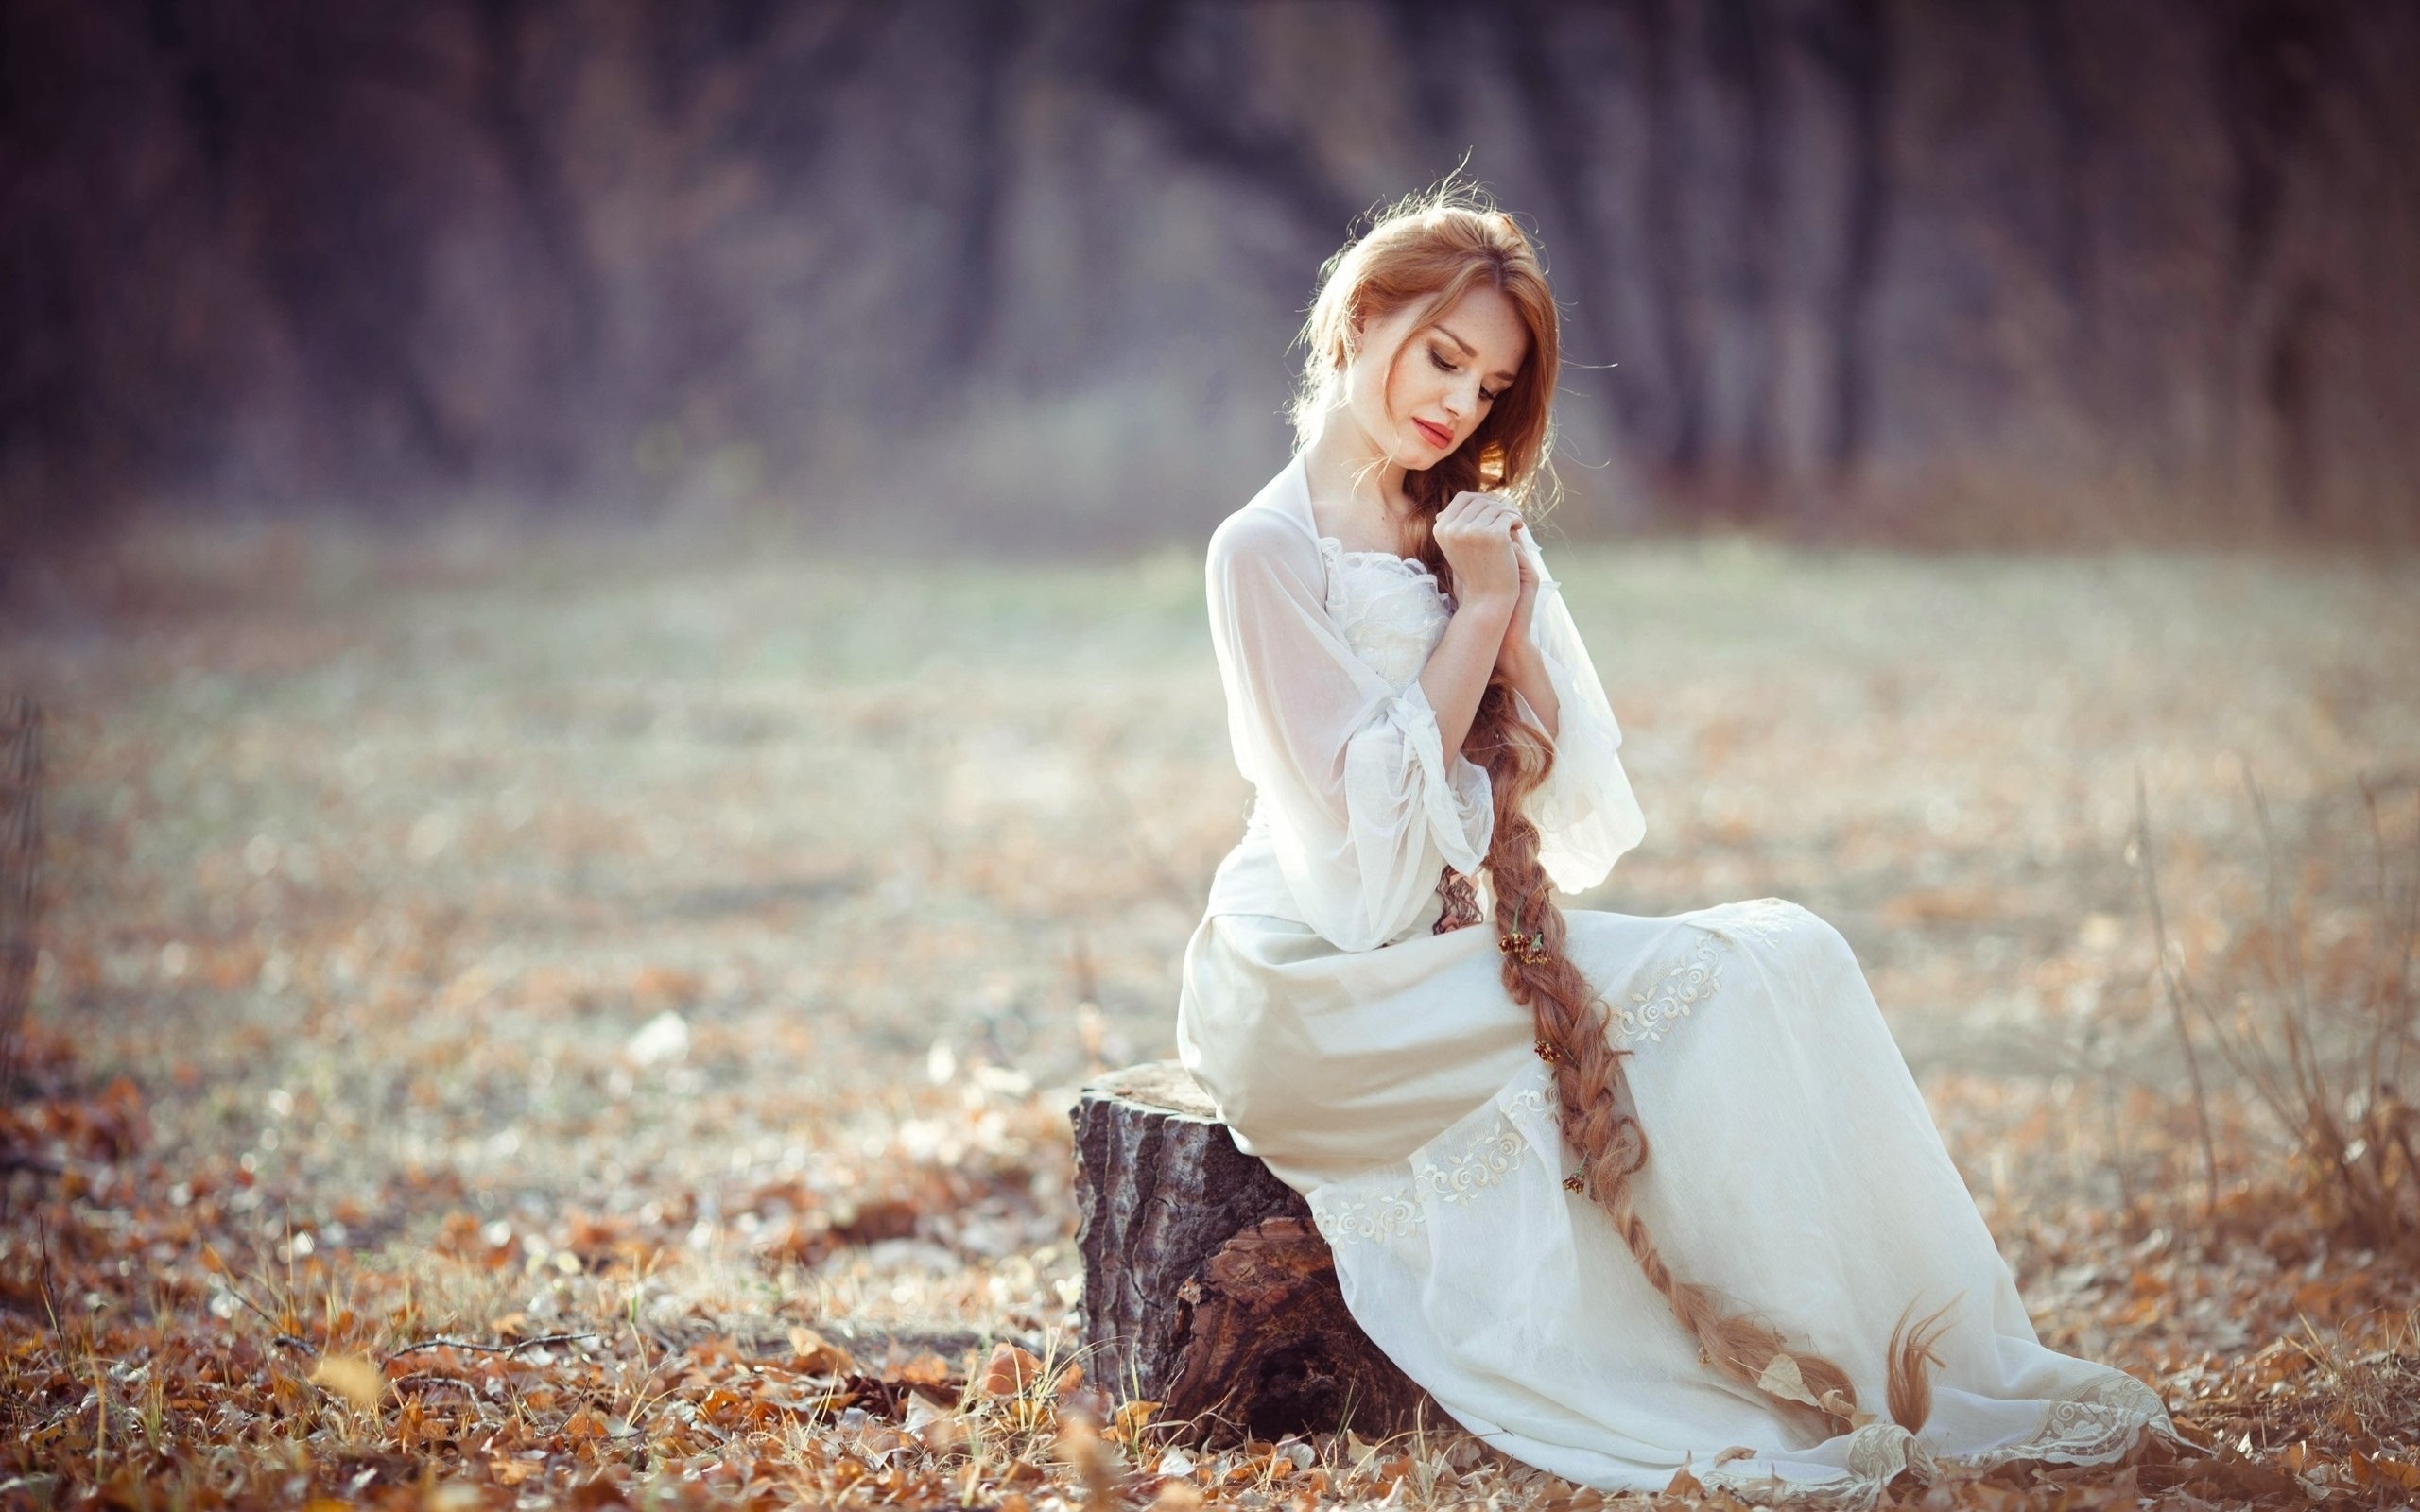 long hair wallpaper,people in nature,photograph,beauty,dress,hairstyle